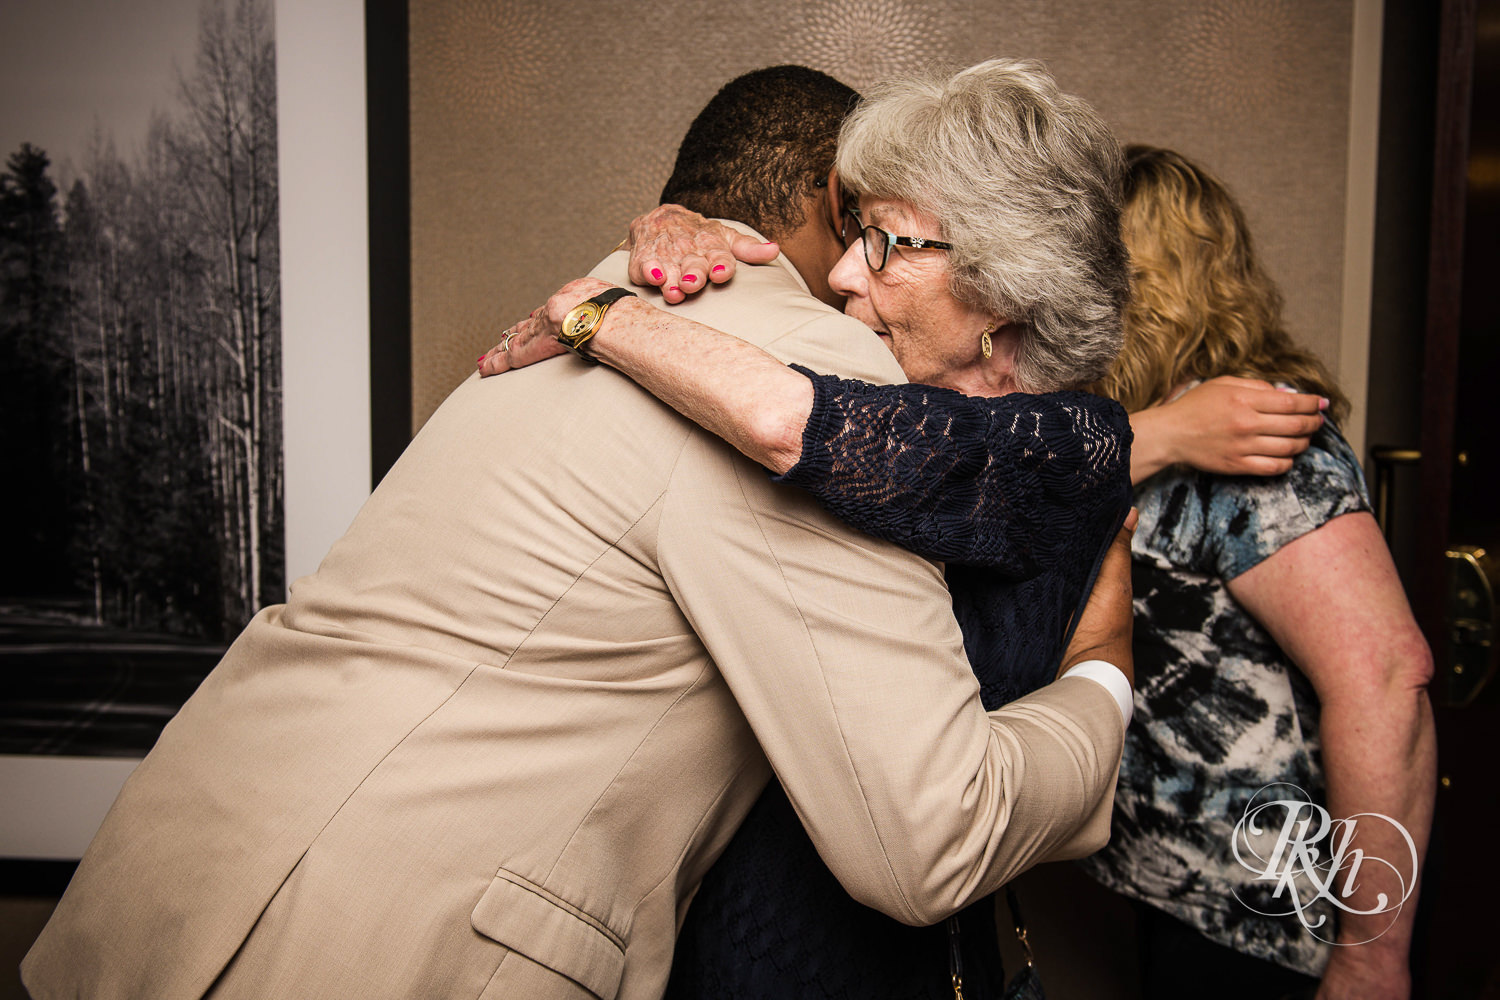 Guests hug groom after wedding ceremony at North Metro Event Center in Shoreview, Minnesota.